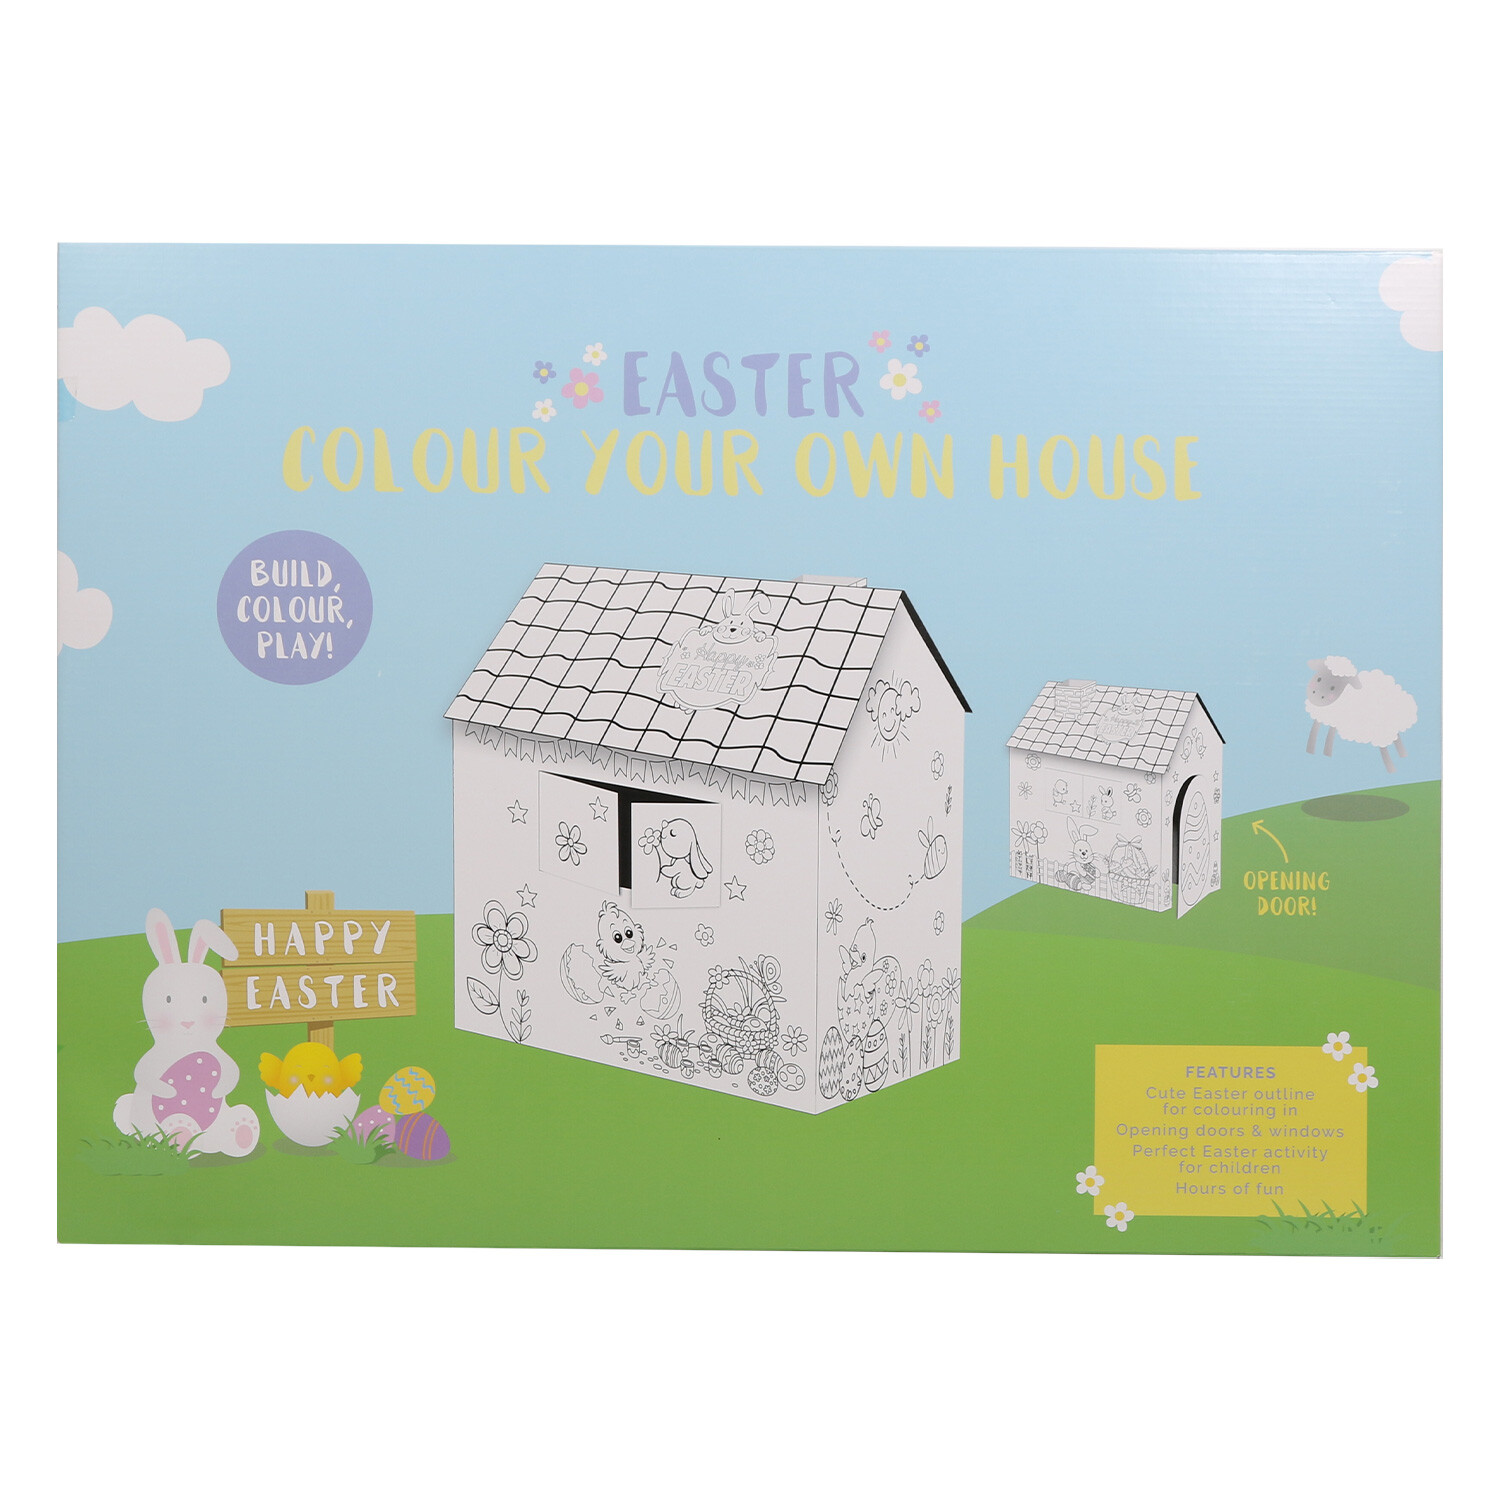 Easter Colour Your Own House Kit Image